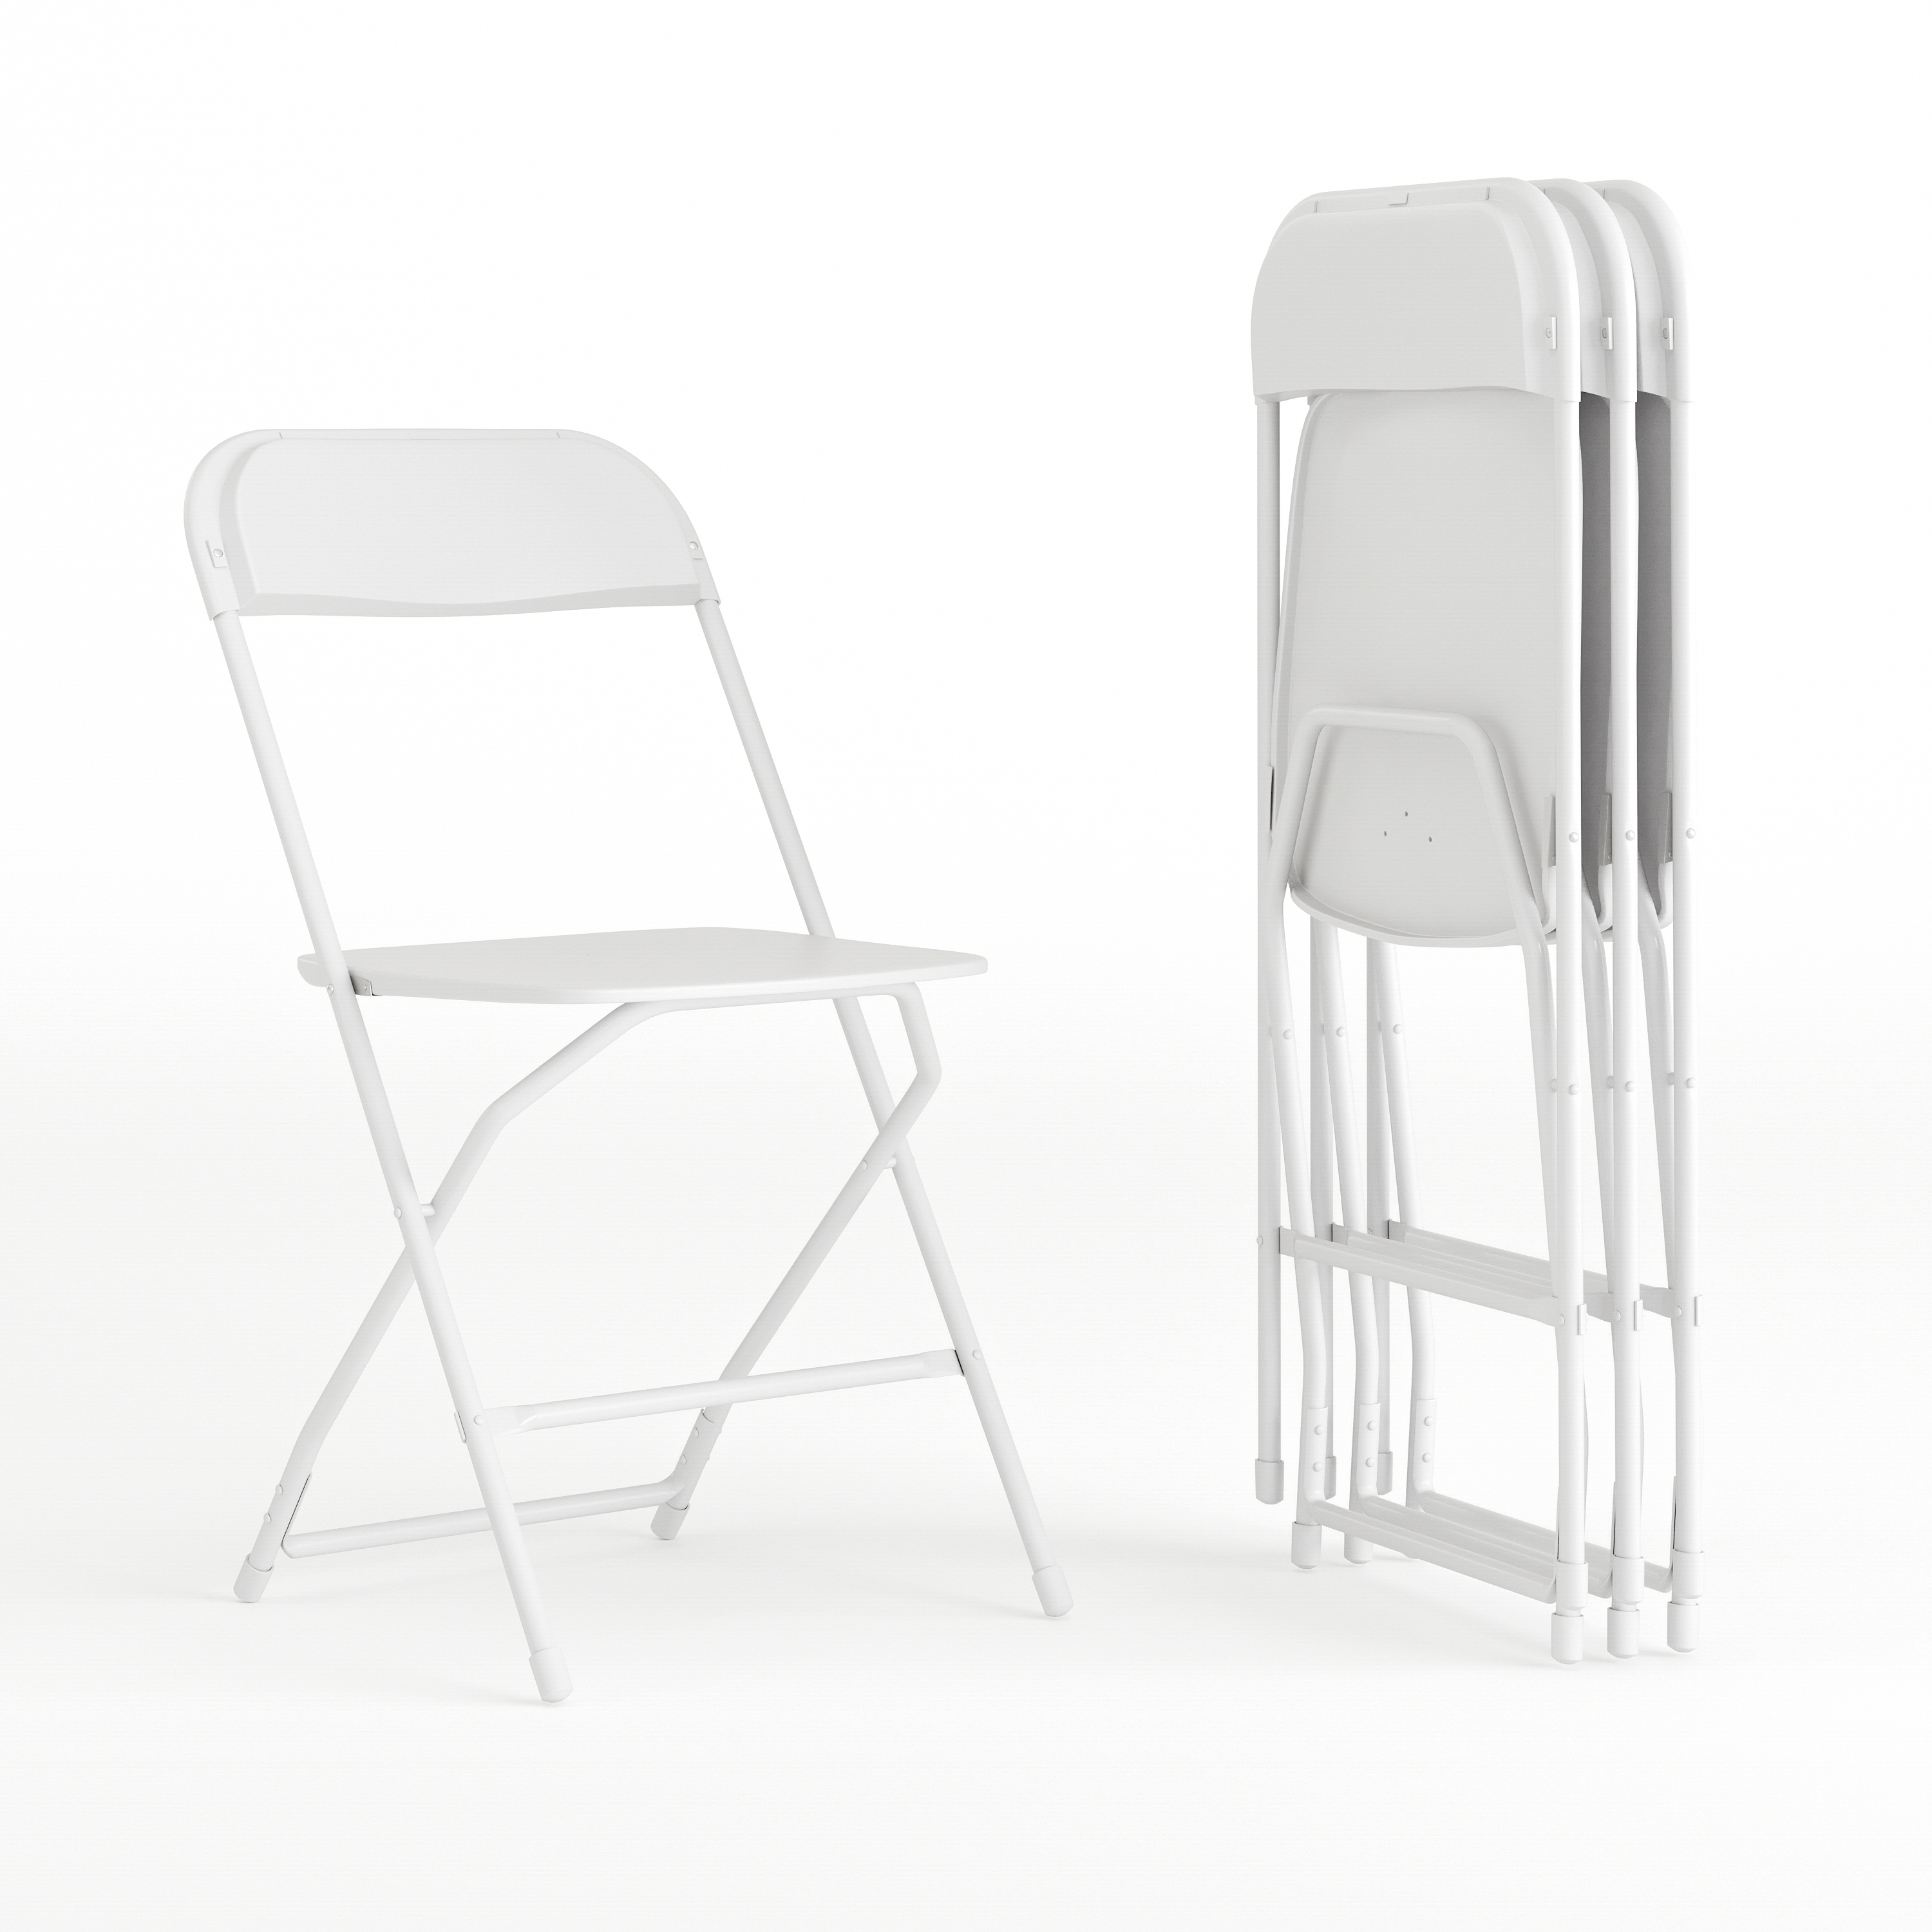 Flash Furniture Hercules Series Plastic Folding Chair White - 4 Pack 650LB Weight Capacity Comfortable Event Chair-Lightweight Folding Chair, Adult - image 1 of 20